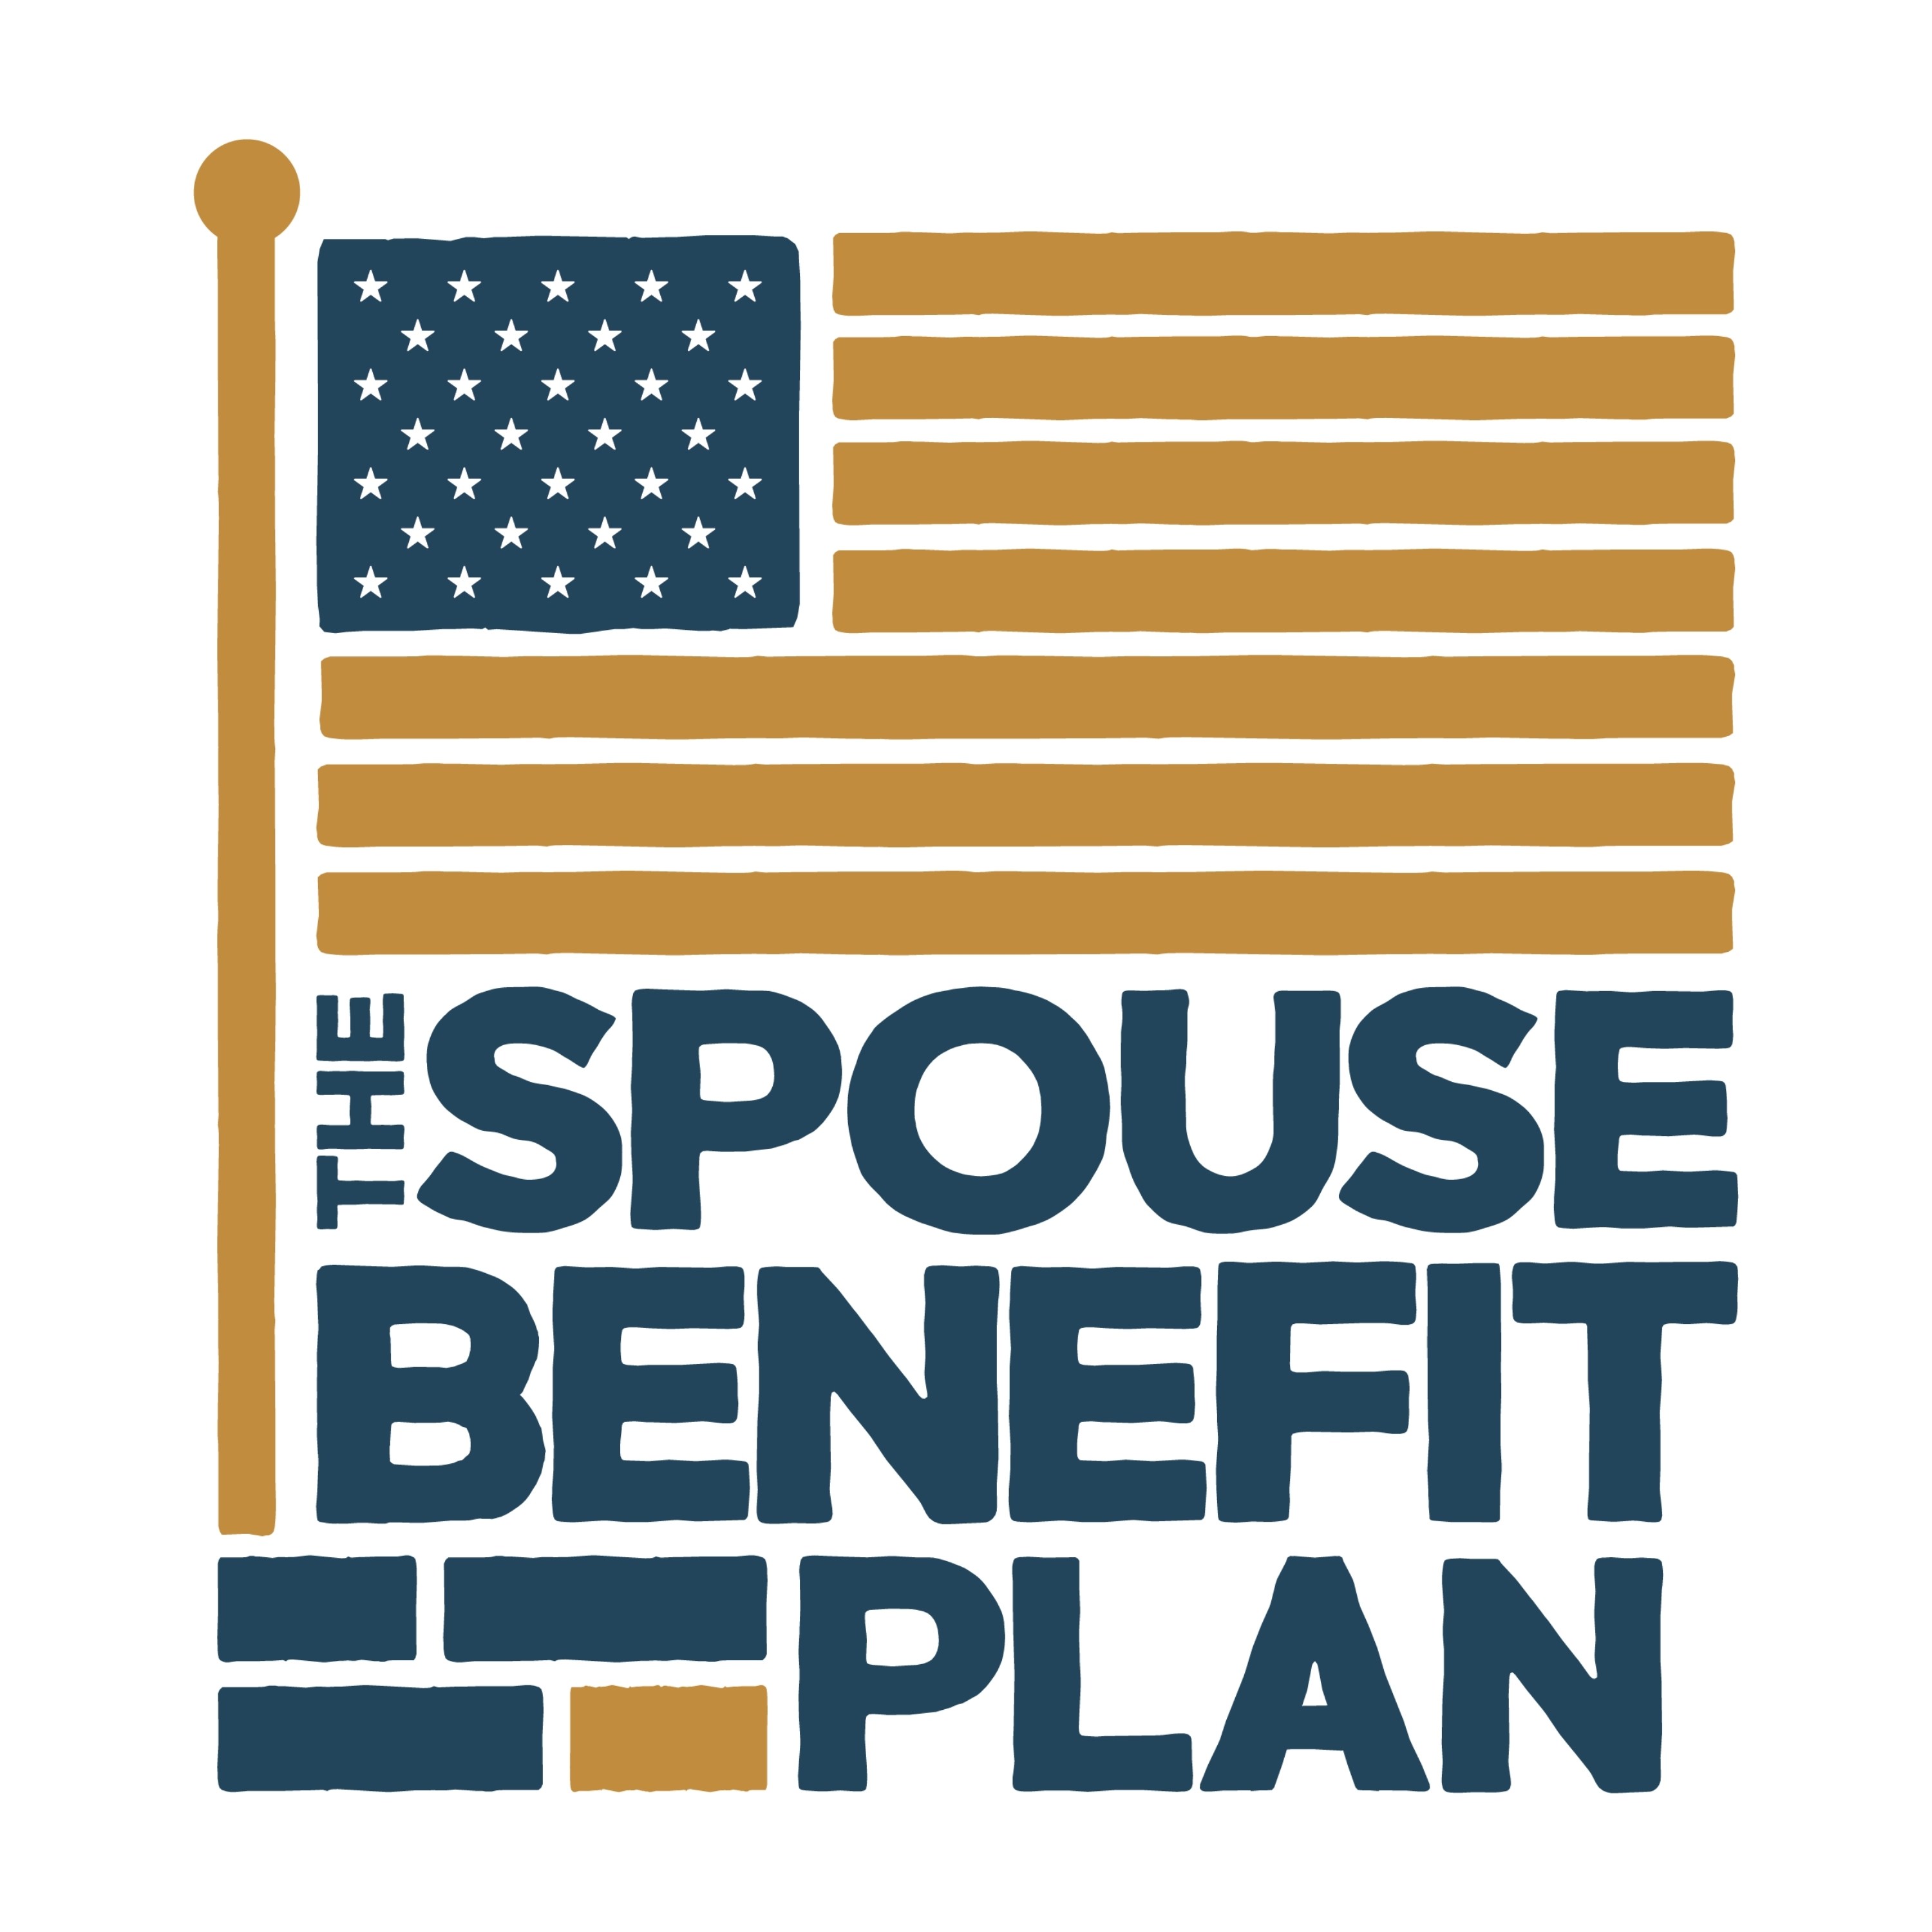 Show artwork for The Spouse Benefit Plan by US VetWealth